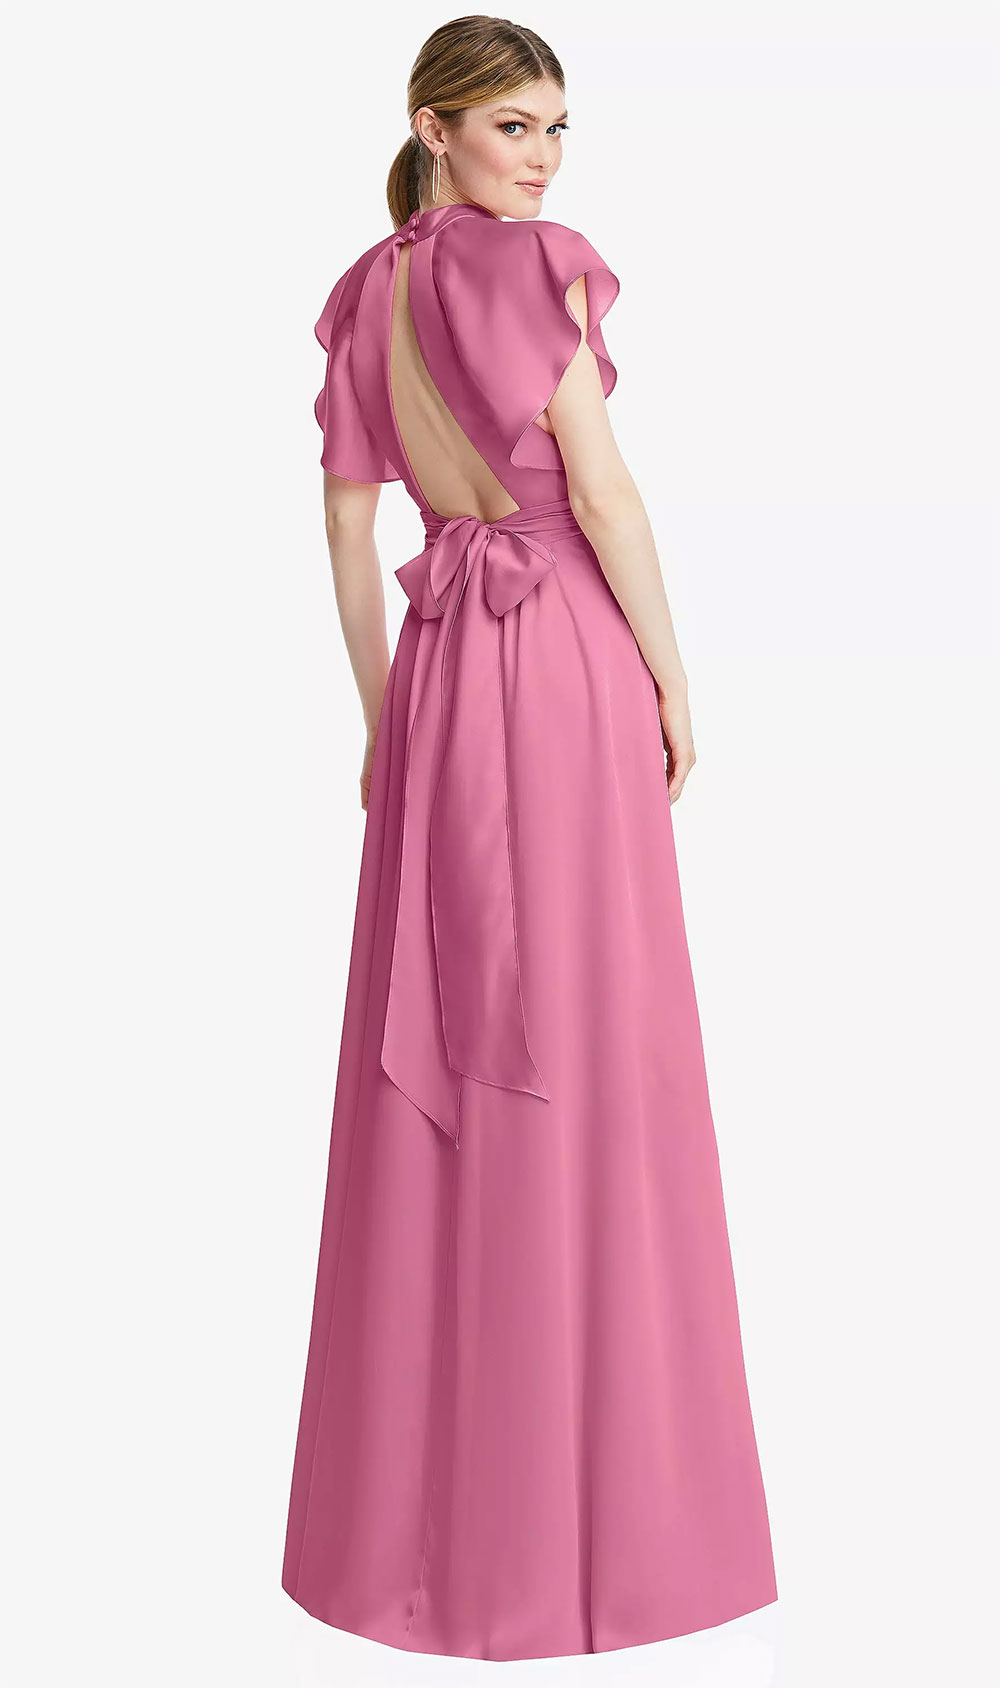 whisper satin bridesmaid dress in pink orchid with flutter sleeves